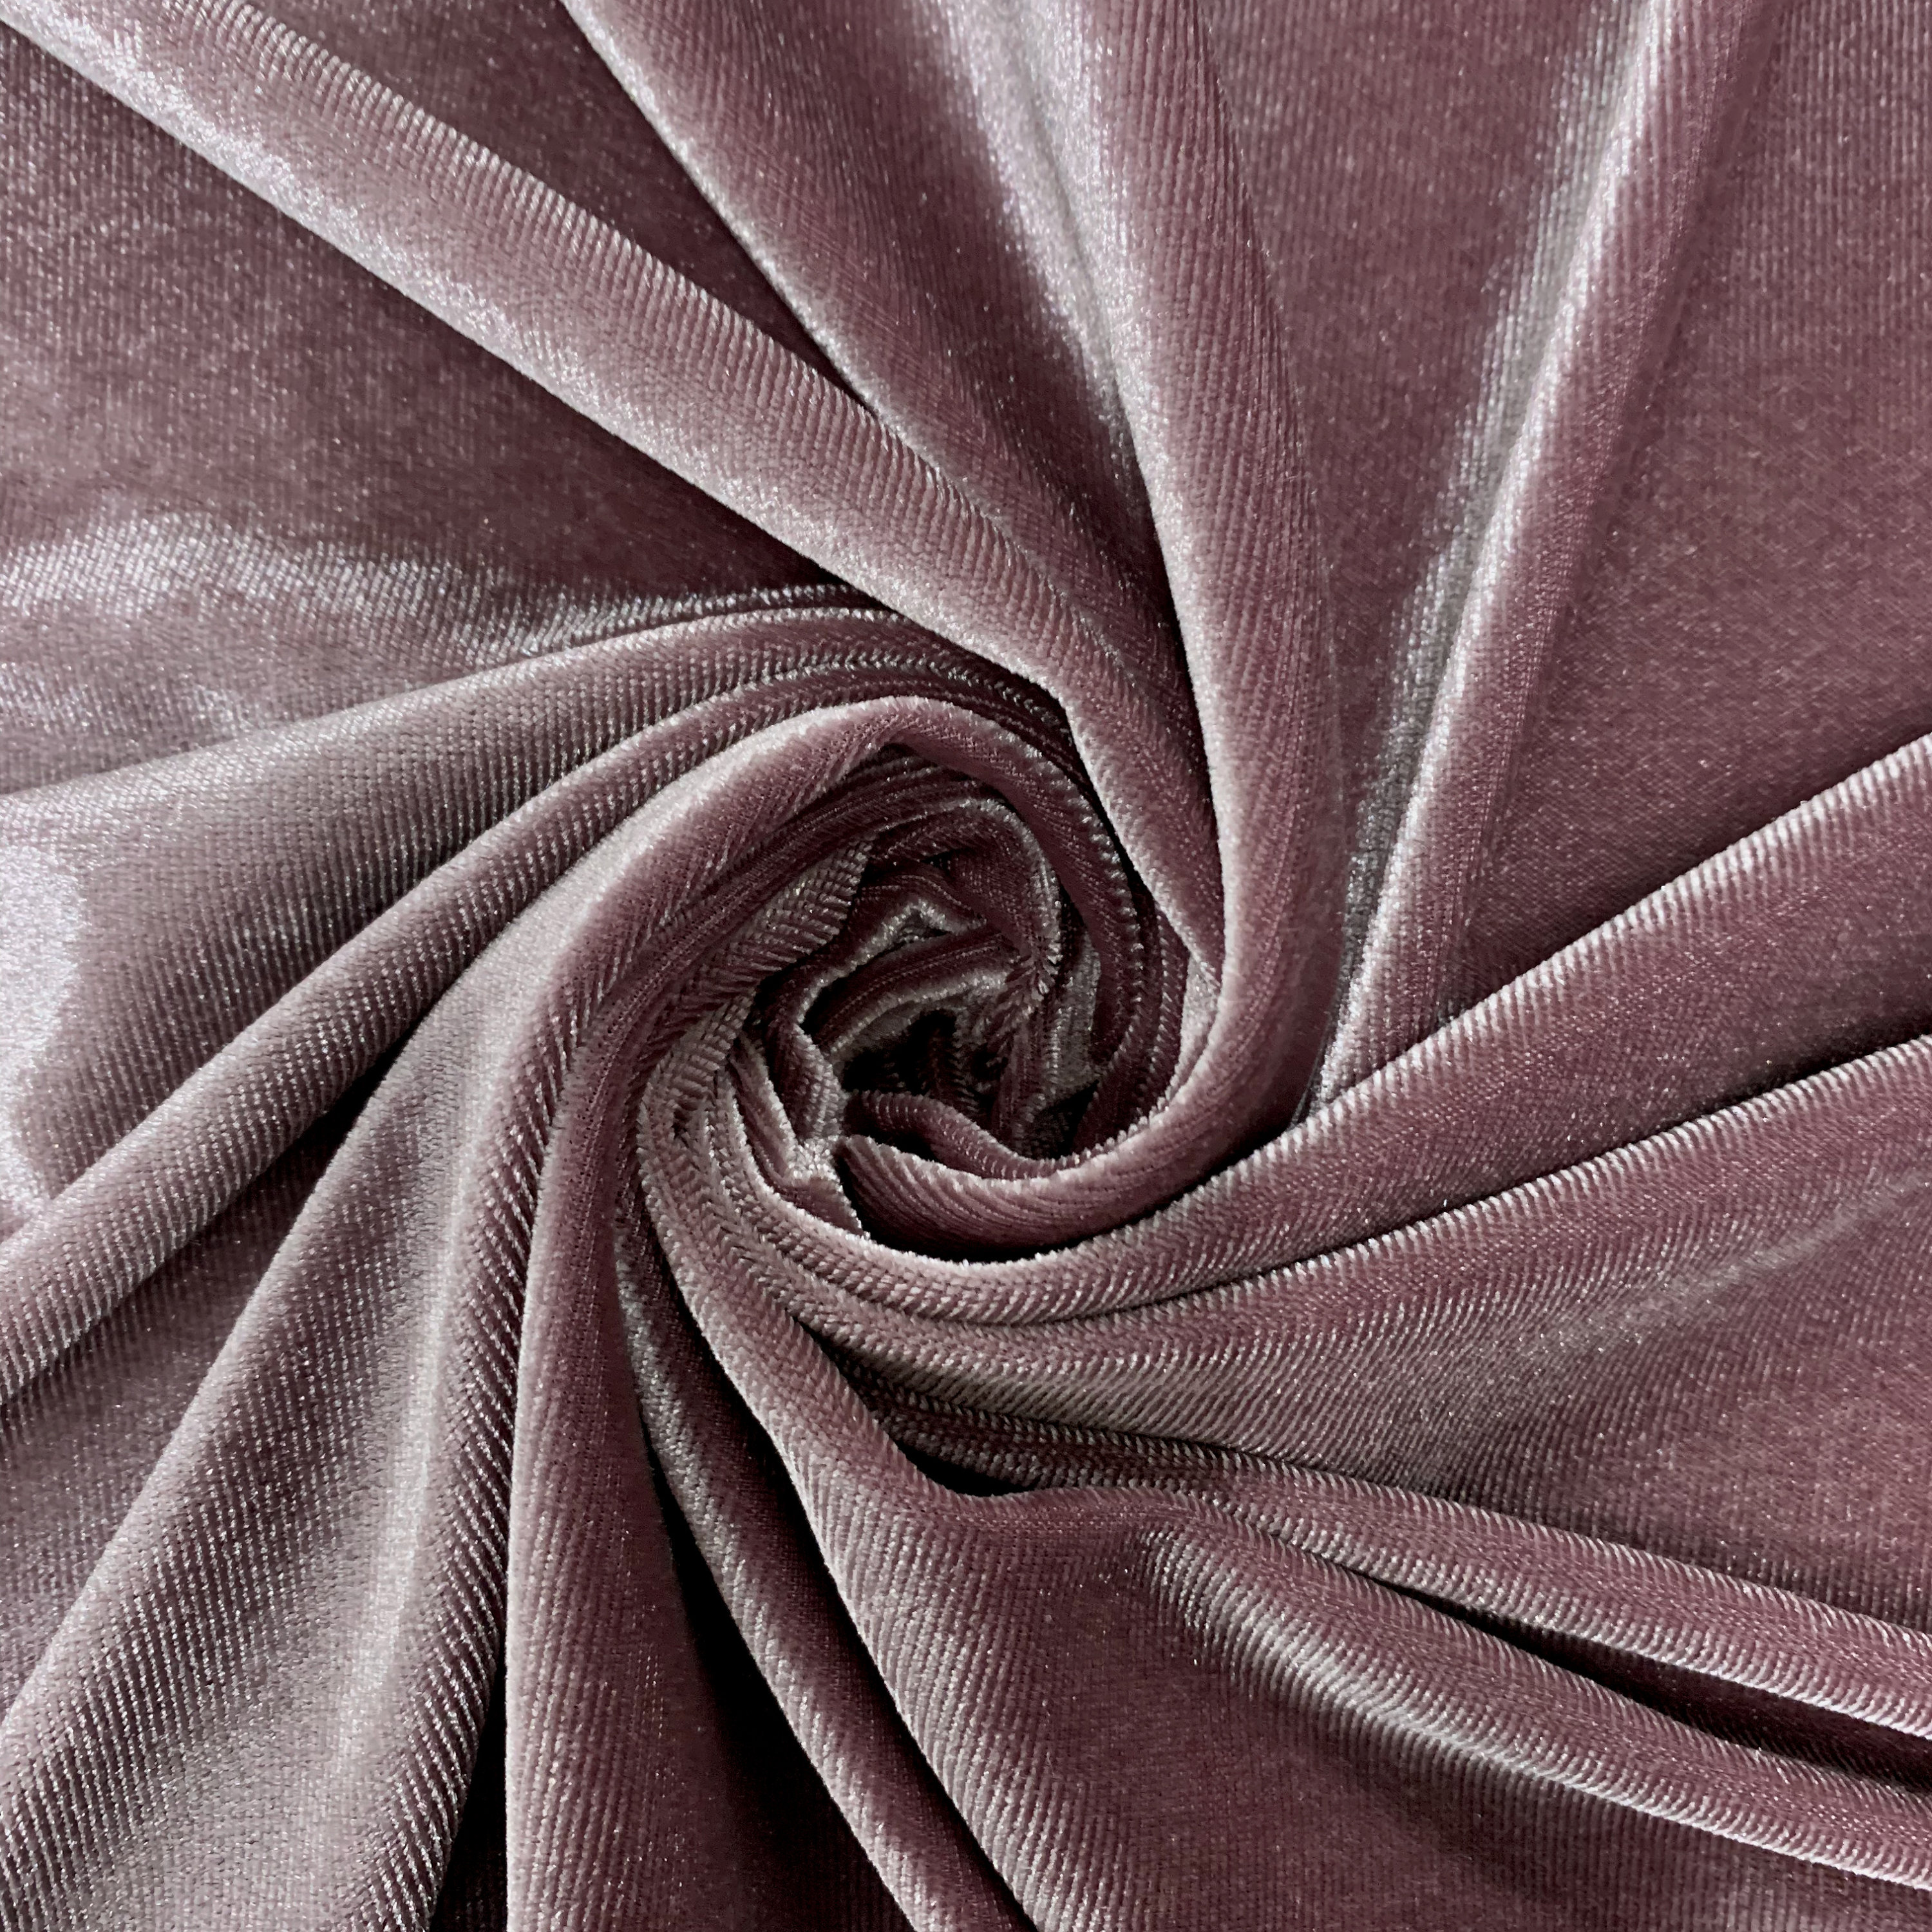 Princess PURPLE Polyester Spandex Stretch Velvet Fabric for Bows, Topknots,  Headwraps, Clothes, Costumes, Crafts - 10001